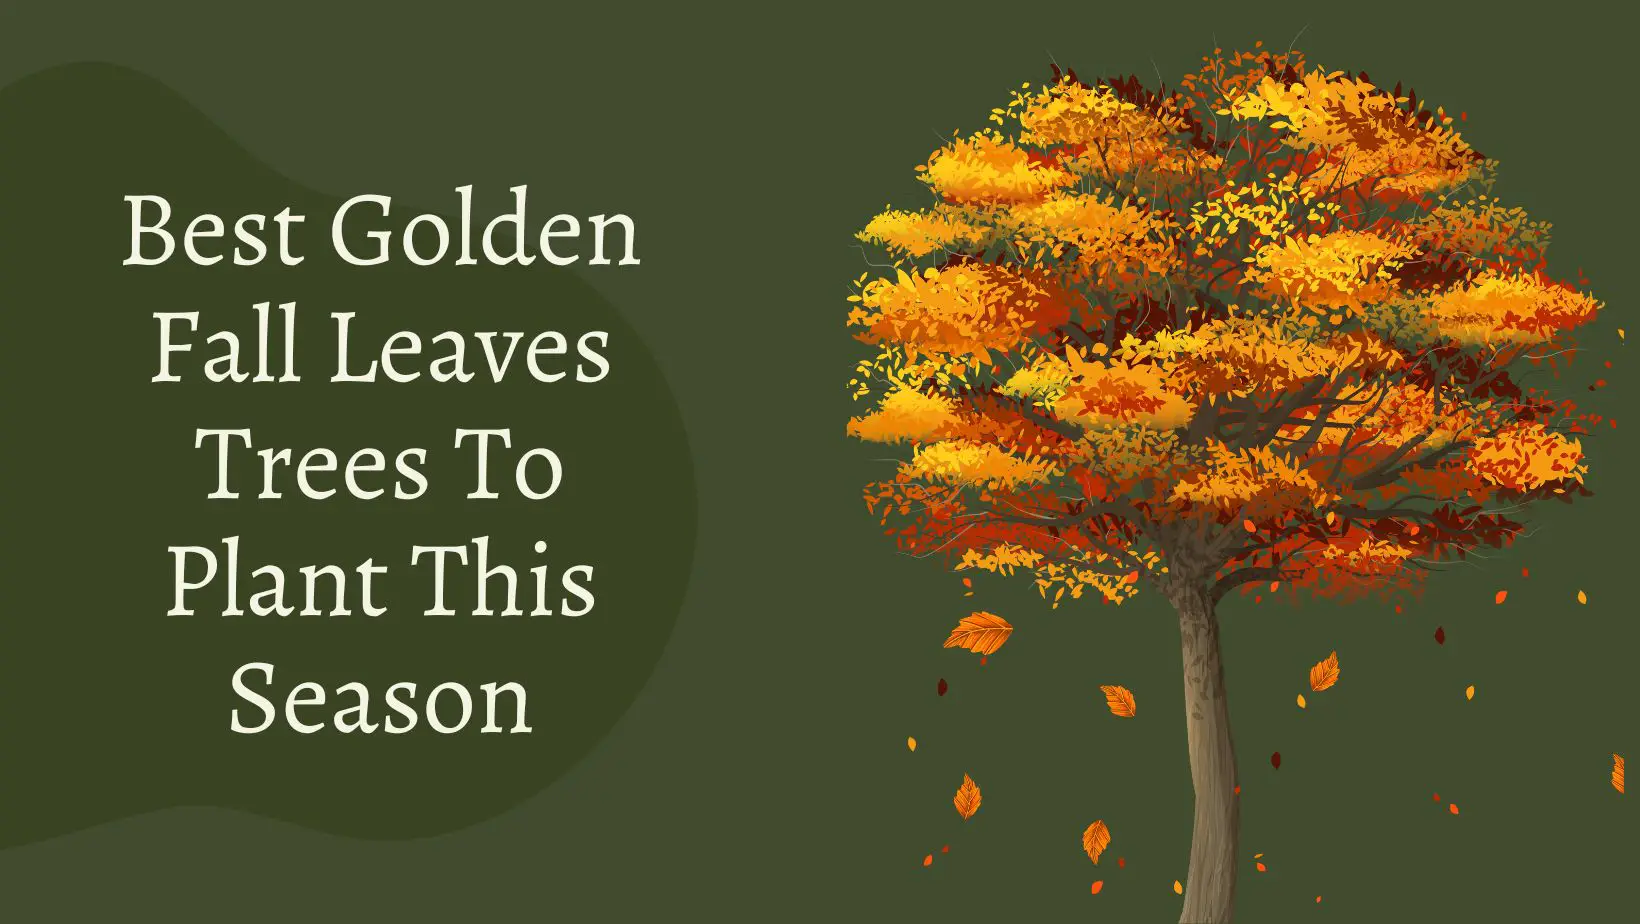 Best Golden Fall Leaves Trees To Plant This Season